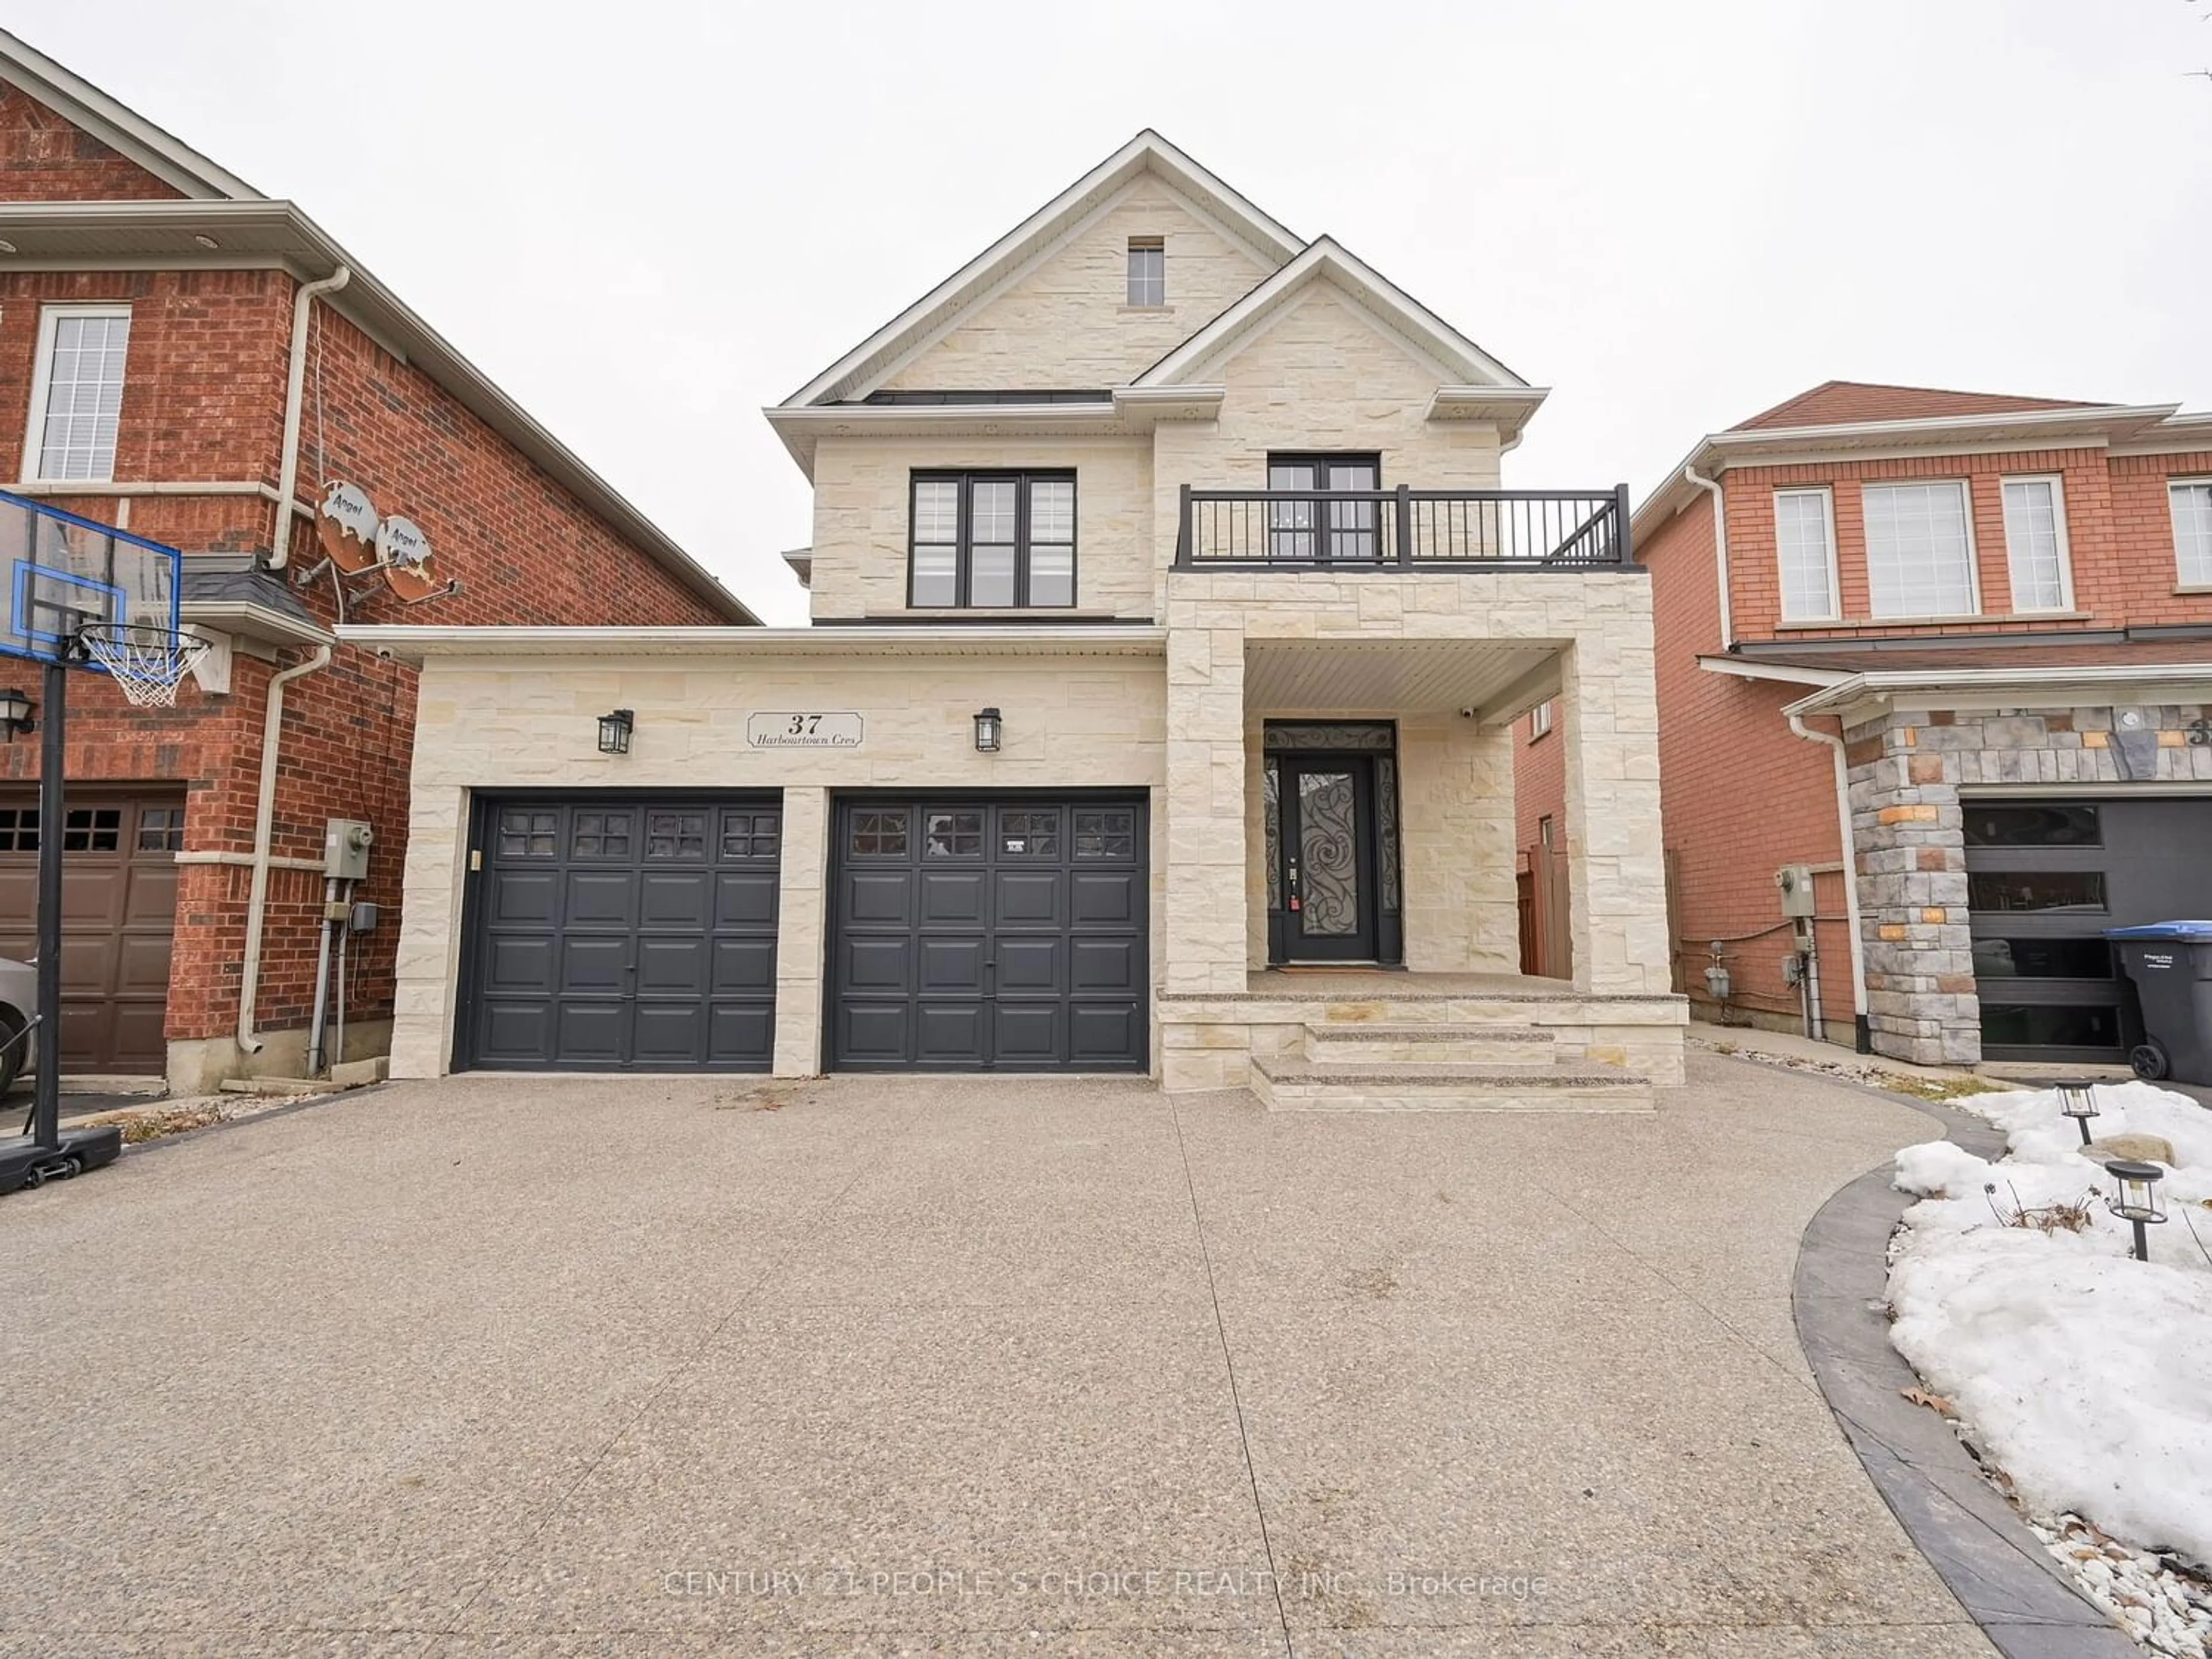 Home with brick exterior material for 37 Harbourtown Cres, Brampton Ontario L6V 4P6